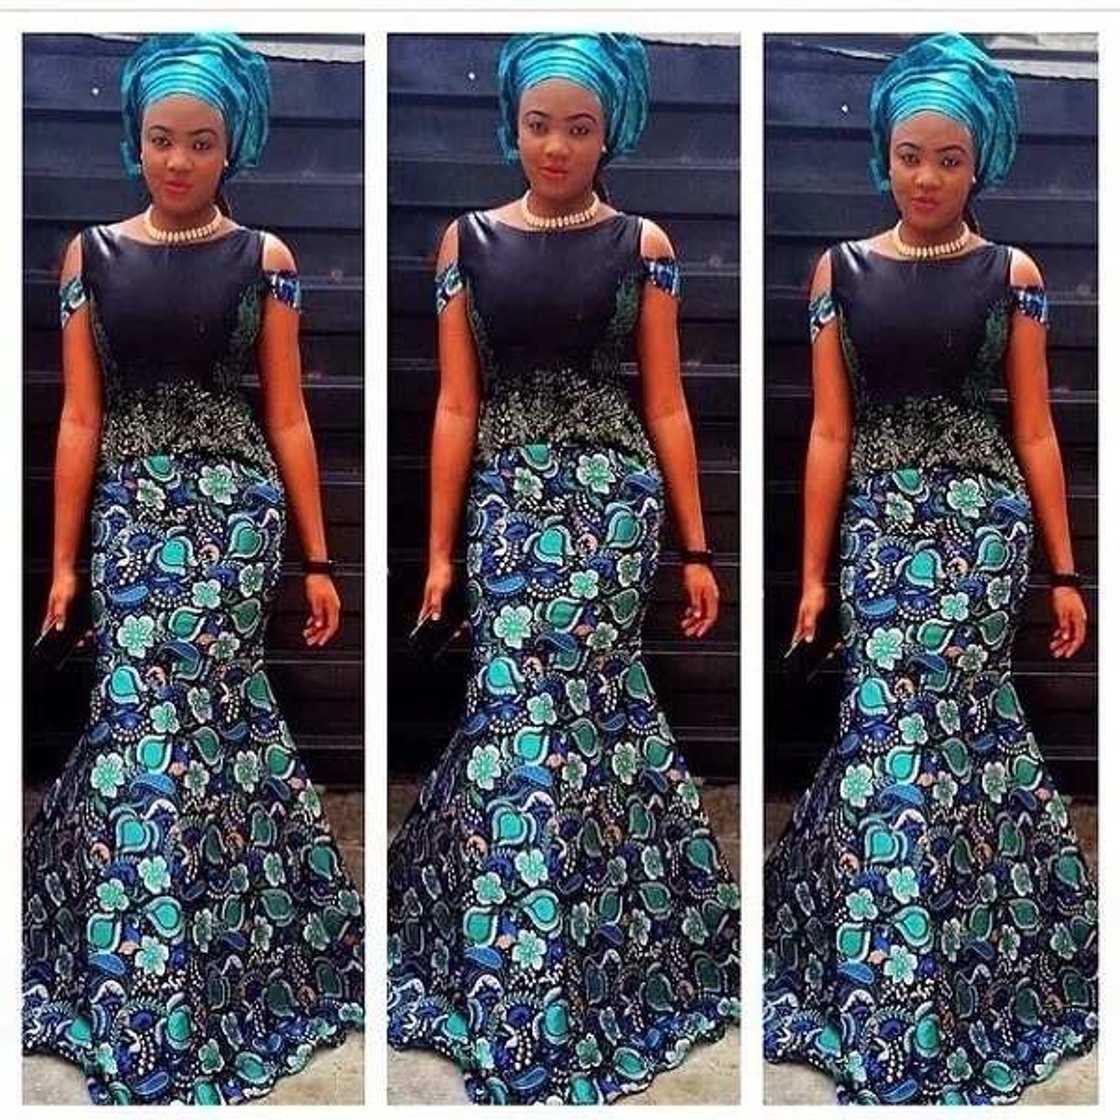 African style dresses and skirts